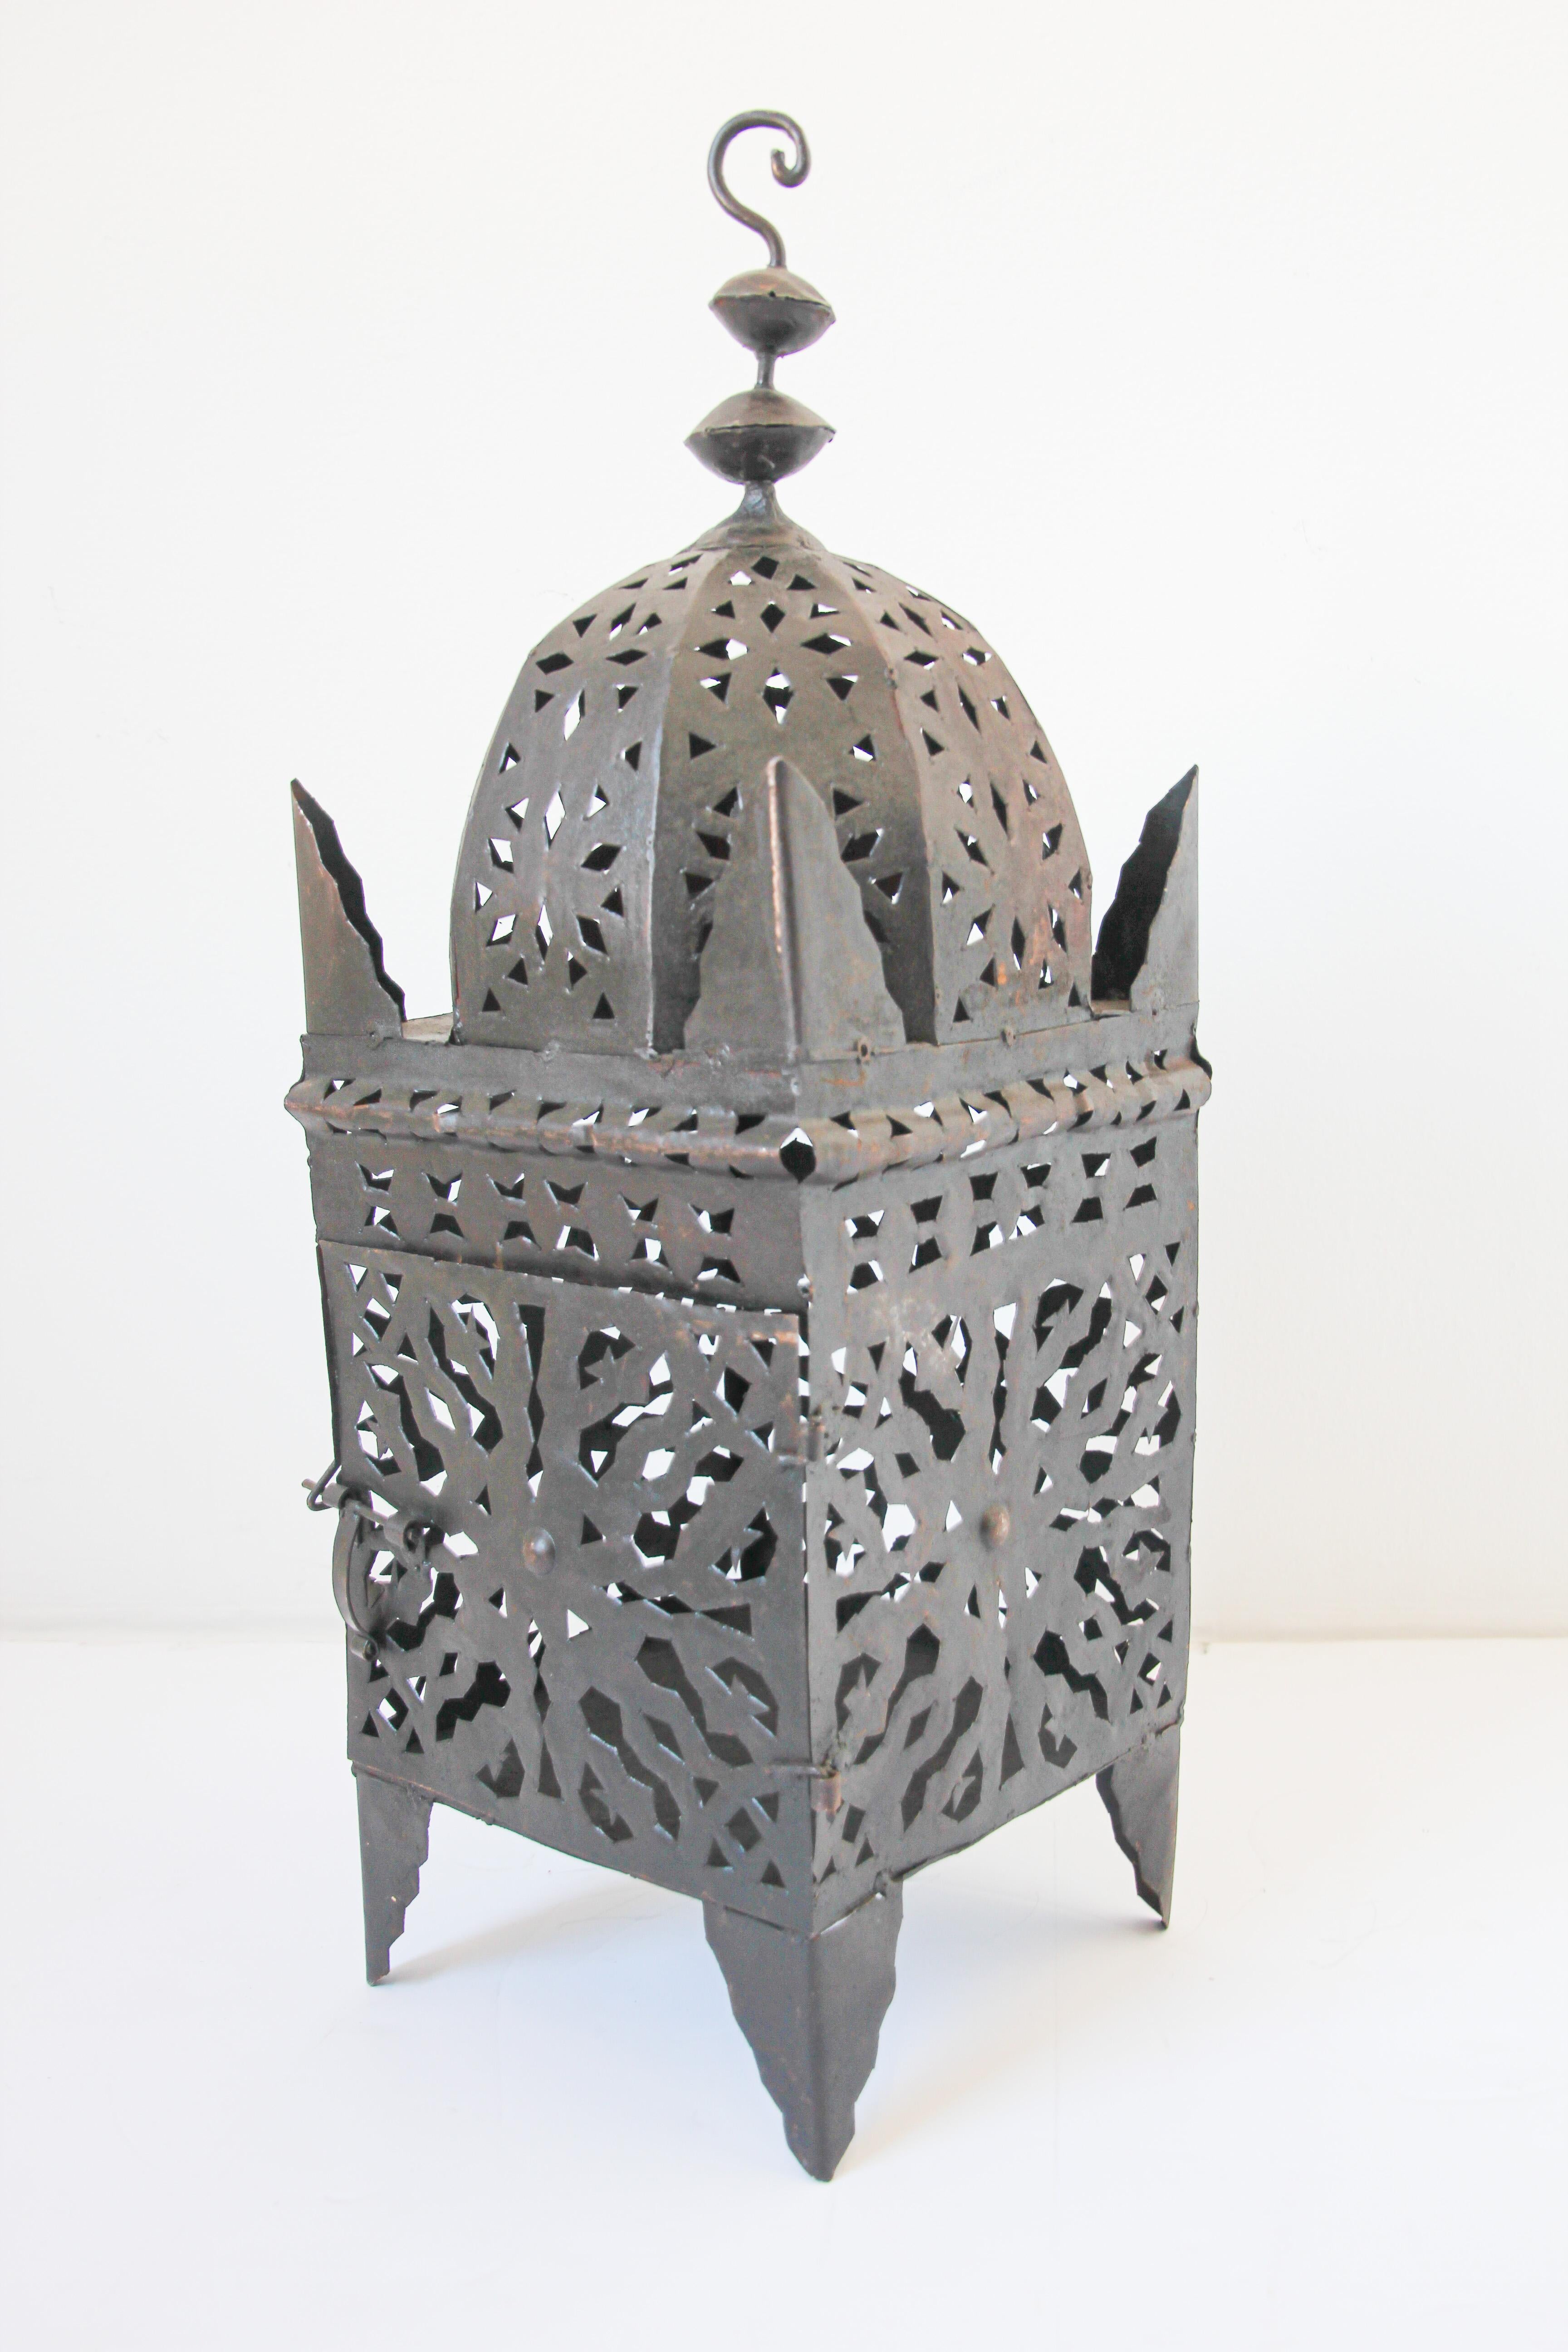 Large Moroccan Moorish metal candle lantern.
Hurricane candle lamp handcrafted in Morocco by artisans, metal hand-cut openwork hammered with Moorish design, open in front for use with pillar candles.
The lantern has a small door to access the